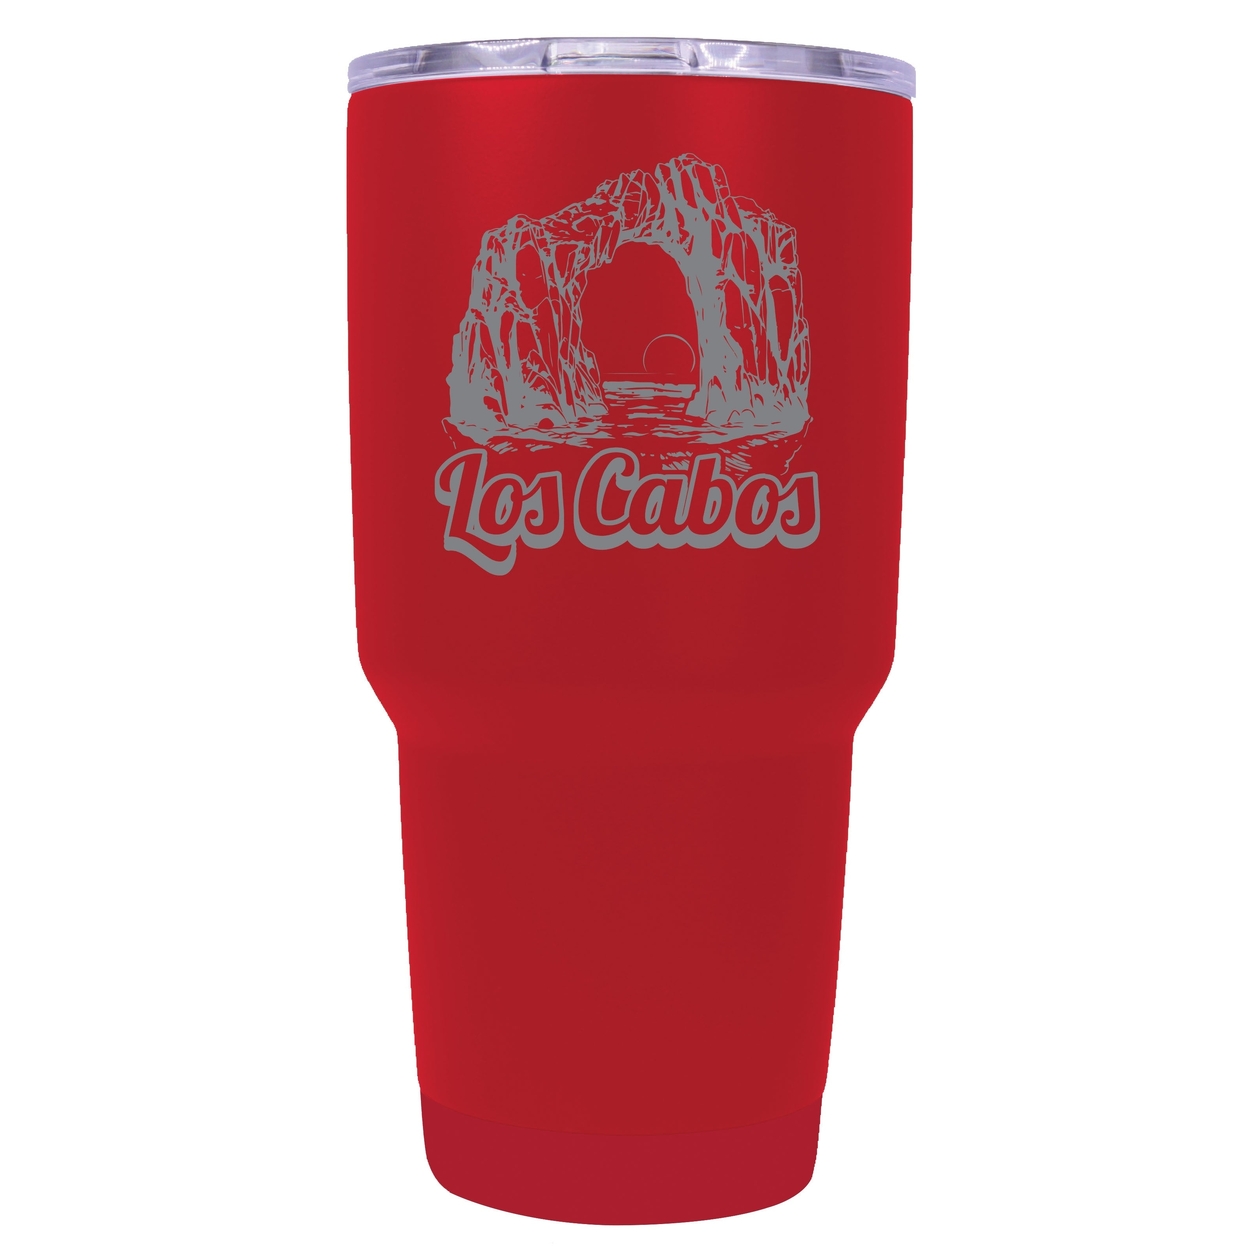 Los Cabos Mexico Souvenir 24 Oz Engraved Insulated Stainless Steel Tumbler - Coral,,2-Pack